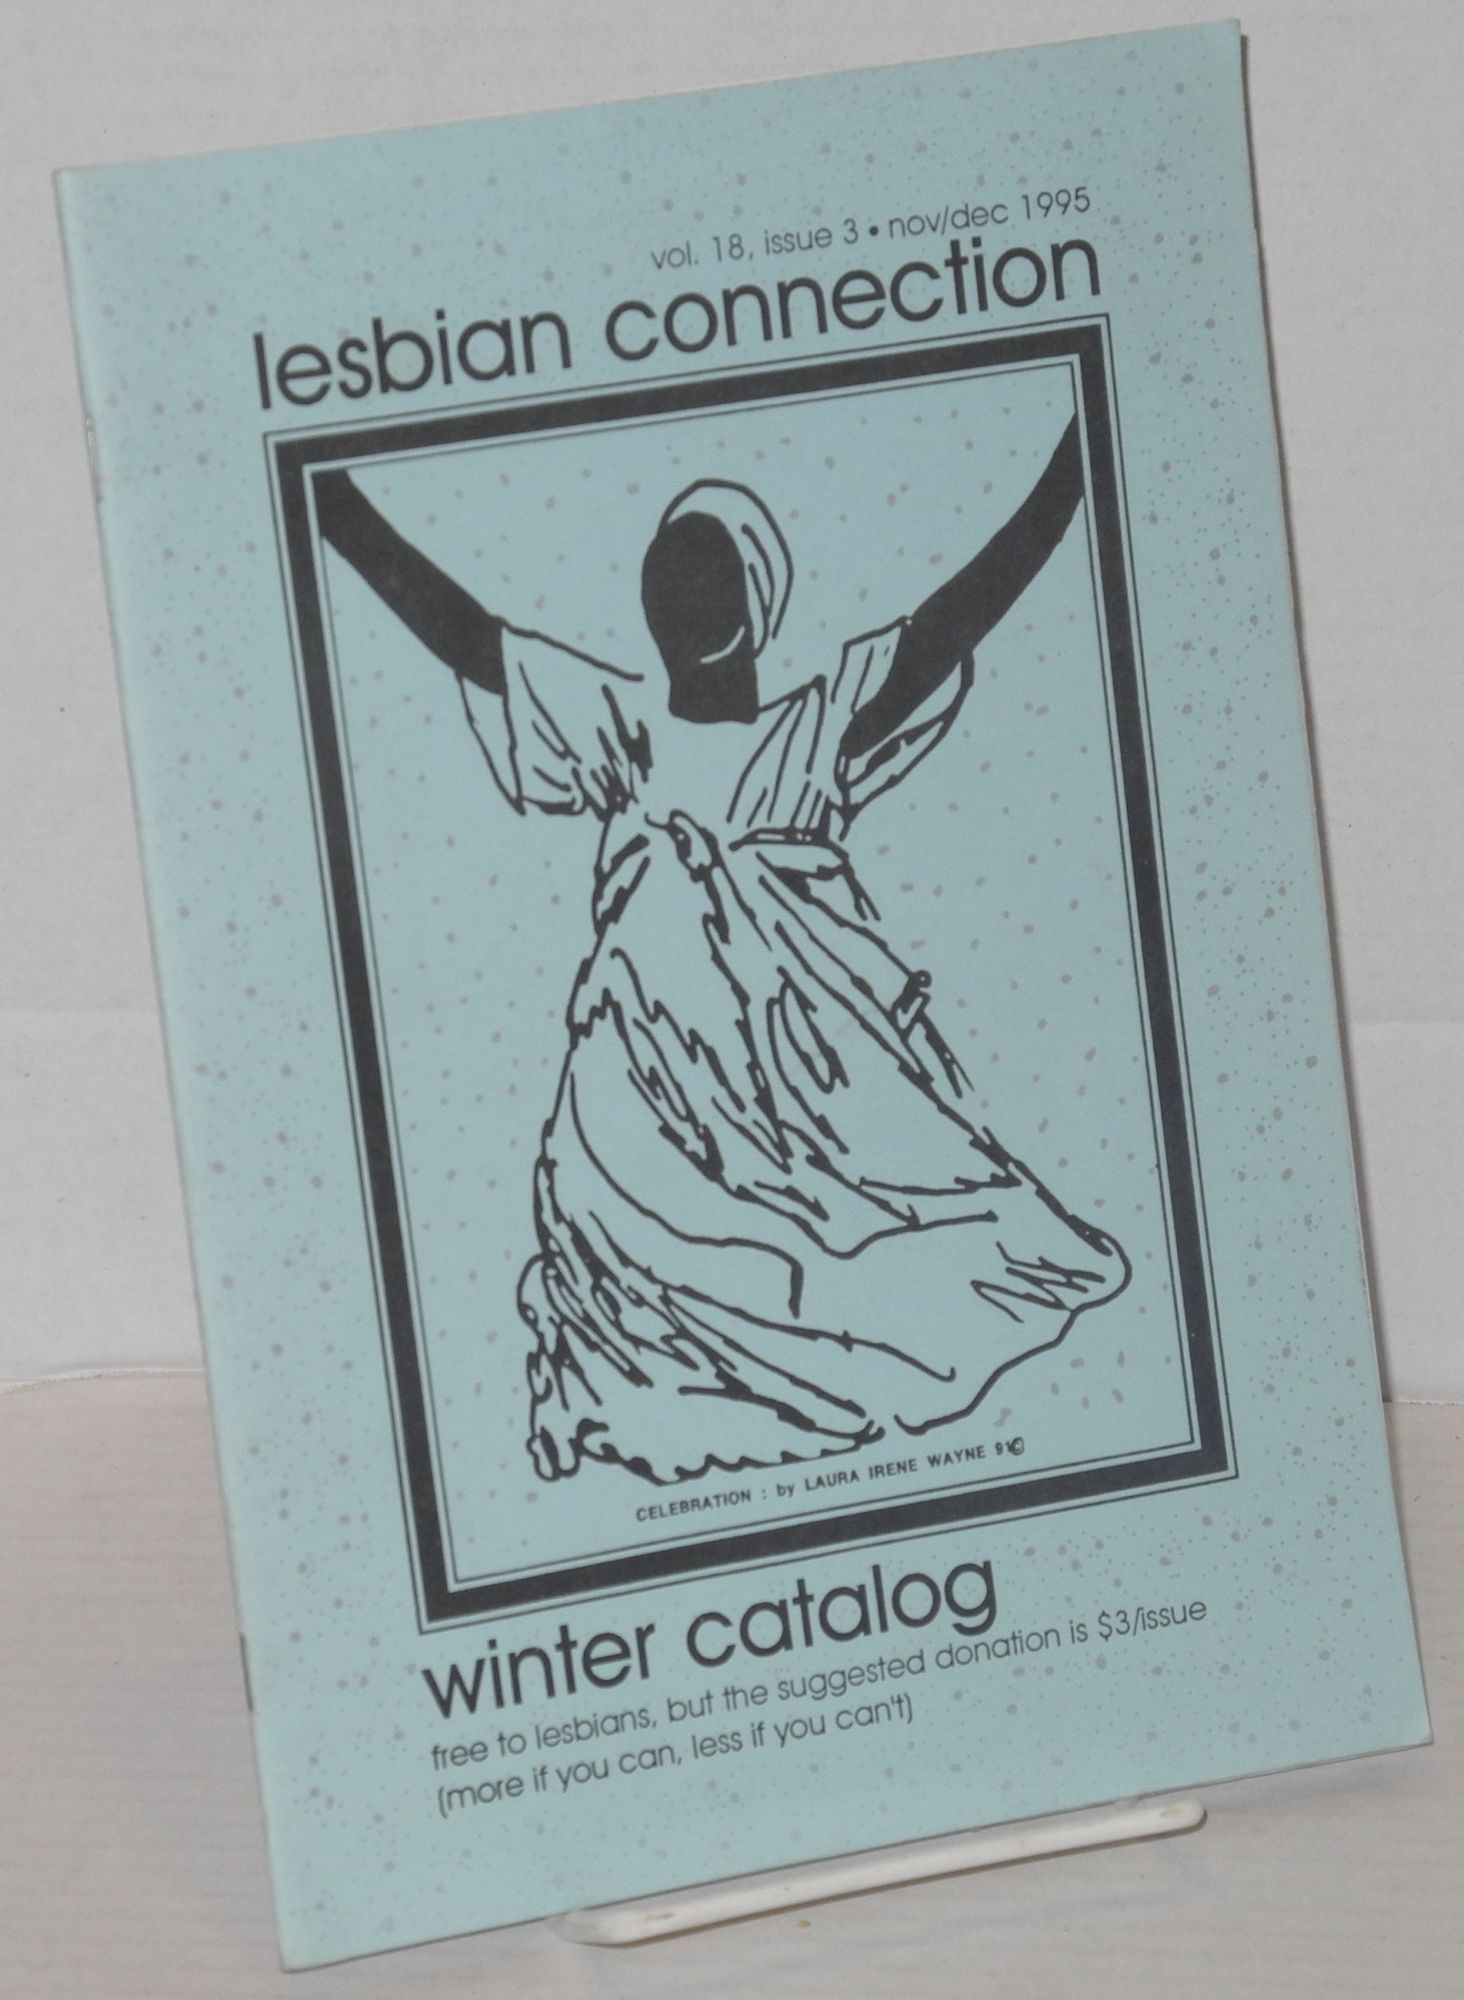 Twister reccomend Free lesbian mailing catalogs